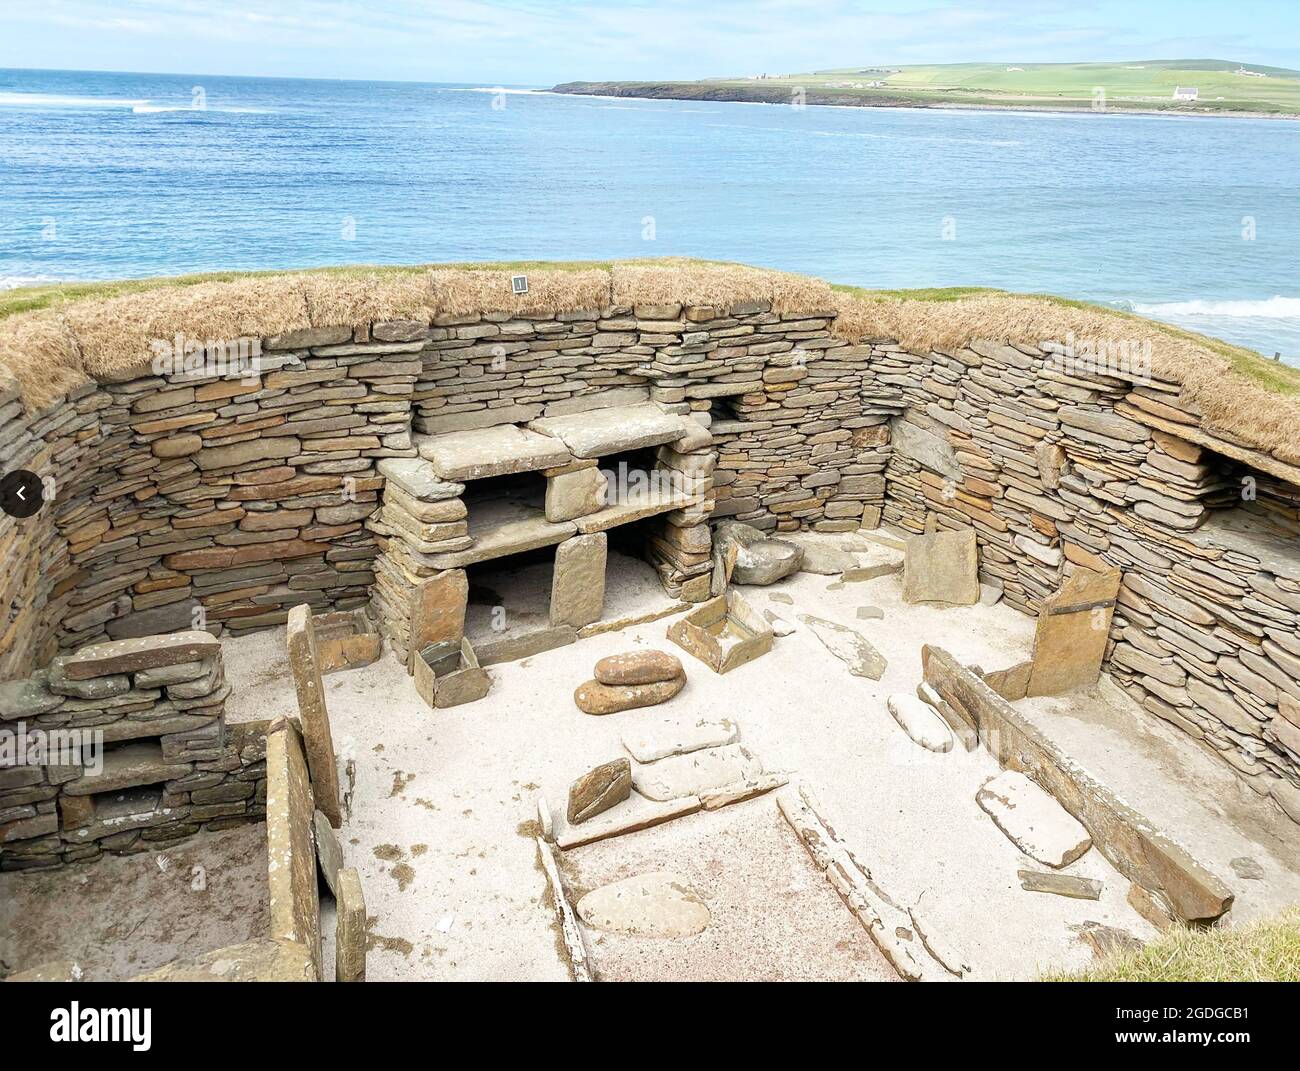 SKARA BRAE Neolithic settlement overlooking the Bay of Skaill on the mainland island of Orkney, Scotland.. Photo: Tony Gale Stock Photo